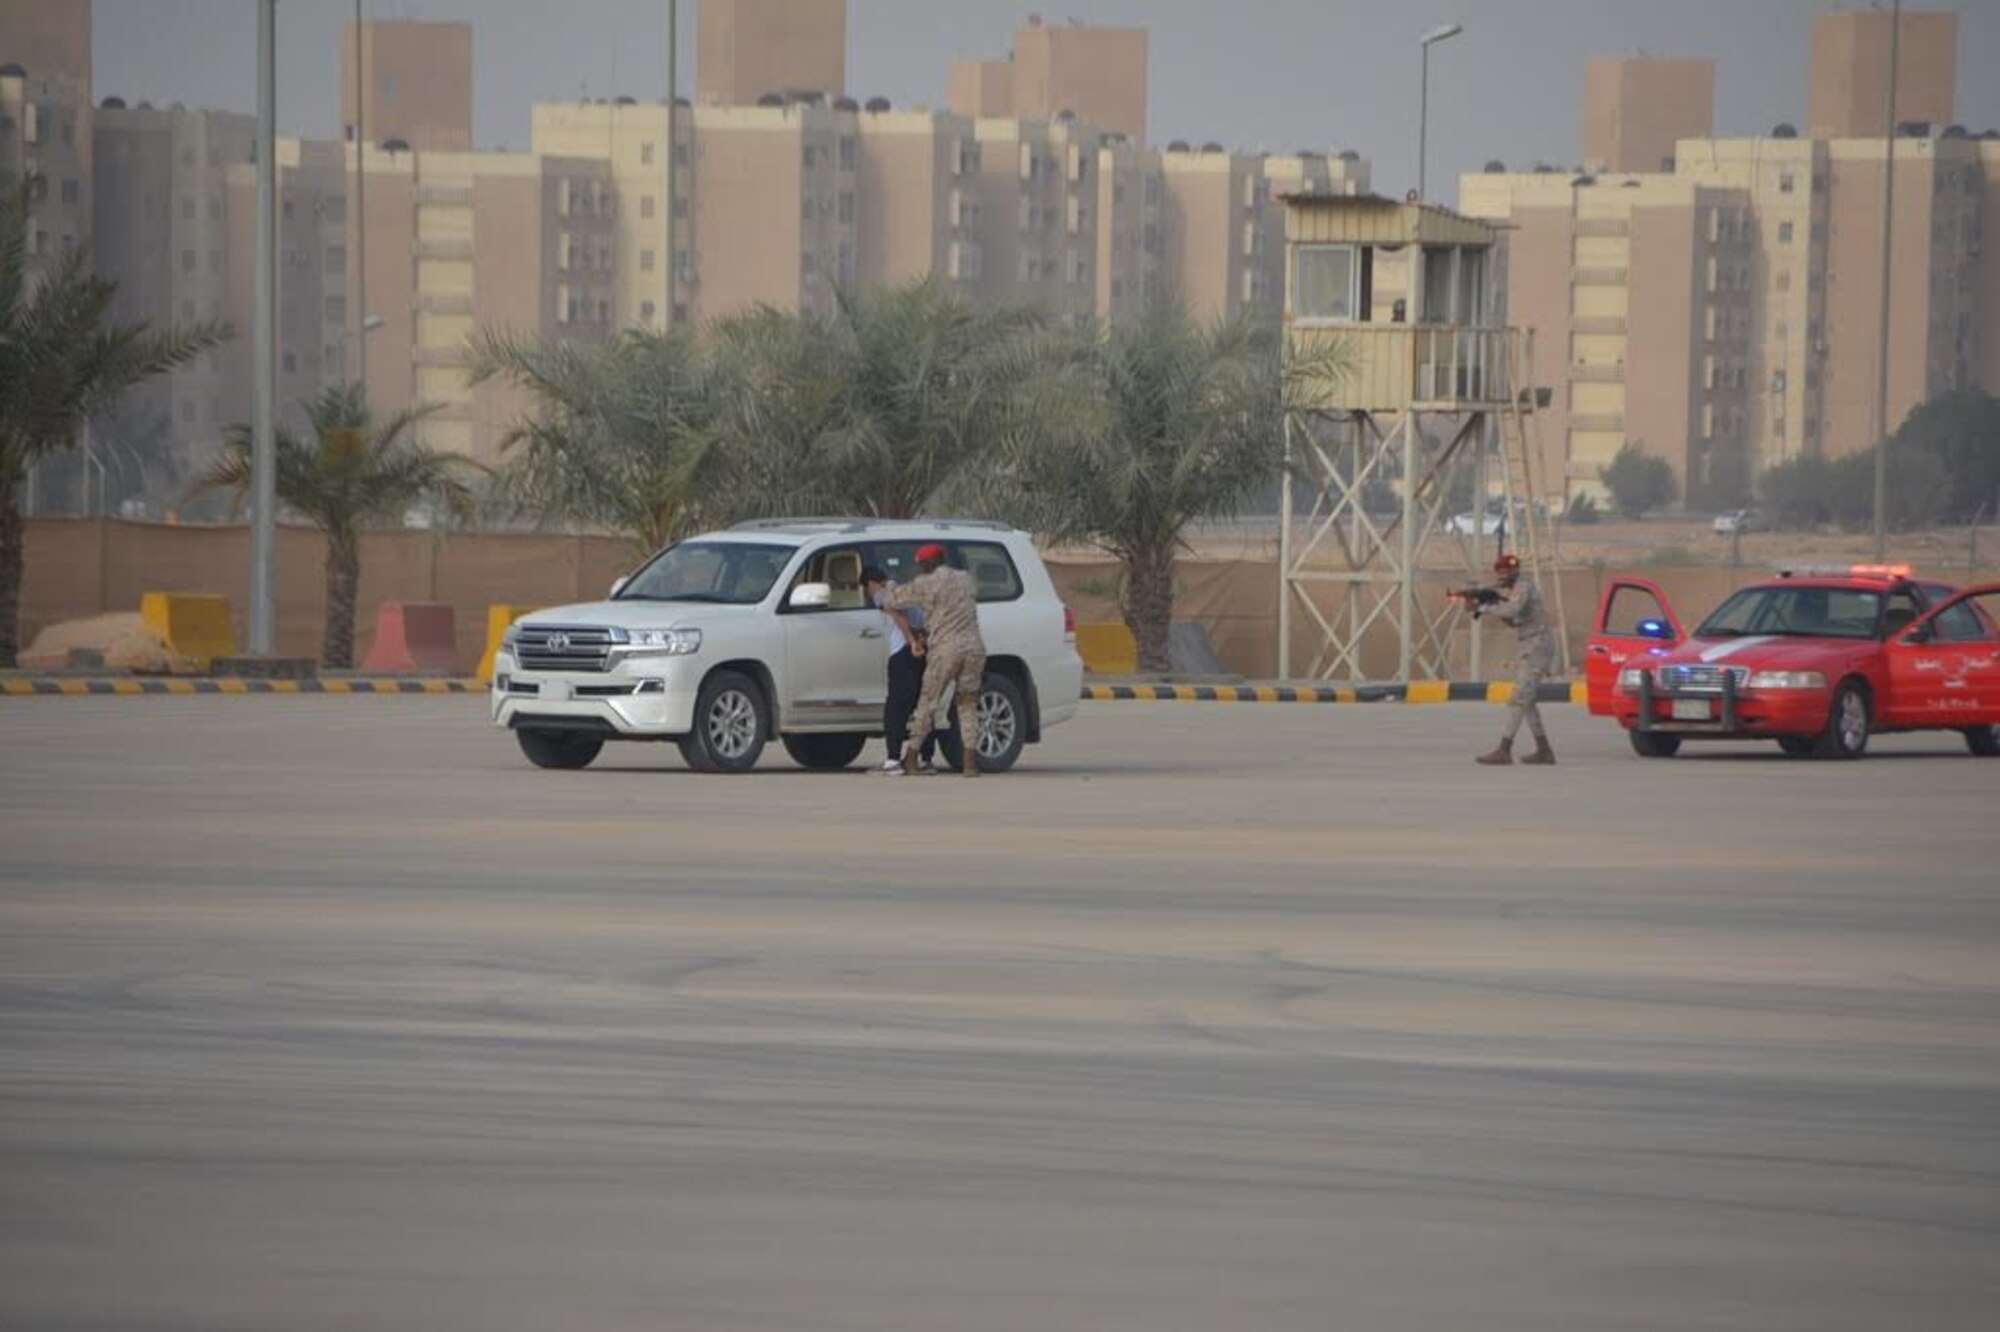 Members of the Saudi Arabia Ministry of Defense Military Police respond to a mock suspicious vehicle during a three-week training exercise with the 879th Expeditionary Security Forces Squadron at Eskan Village, Kingdom of Saudi Arabia March 26, 2017. Airmen and Saudi police members trained in multiple areas of security protection including: formations for escorting, identifying explosives and vehicle searches. (Courtesy photo)